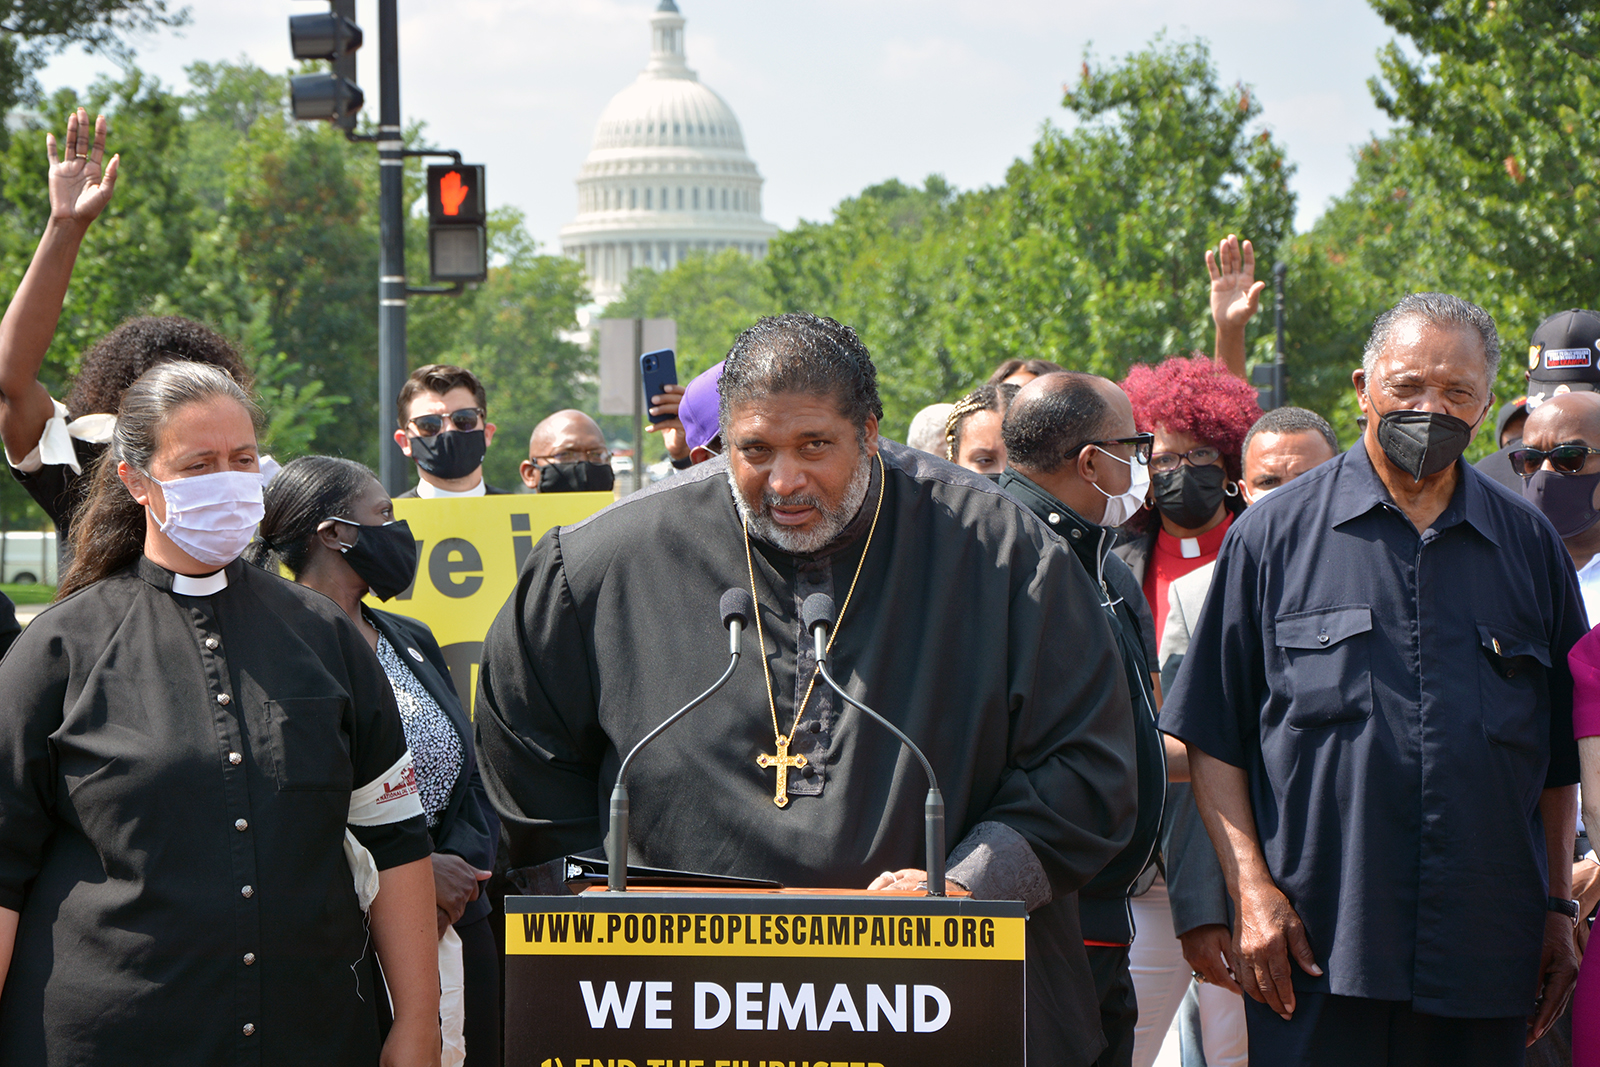 The Rev. William Barber, center, flanked by the Rev. Liz Theoharis, left, and the Rev. Jesse Jackson, right, speaks during a Poor People's Campaign demonstration in Washington, Monday, Aug. 2, 2021. RNS photo by Jack Jenkins